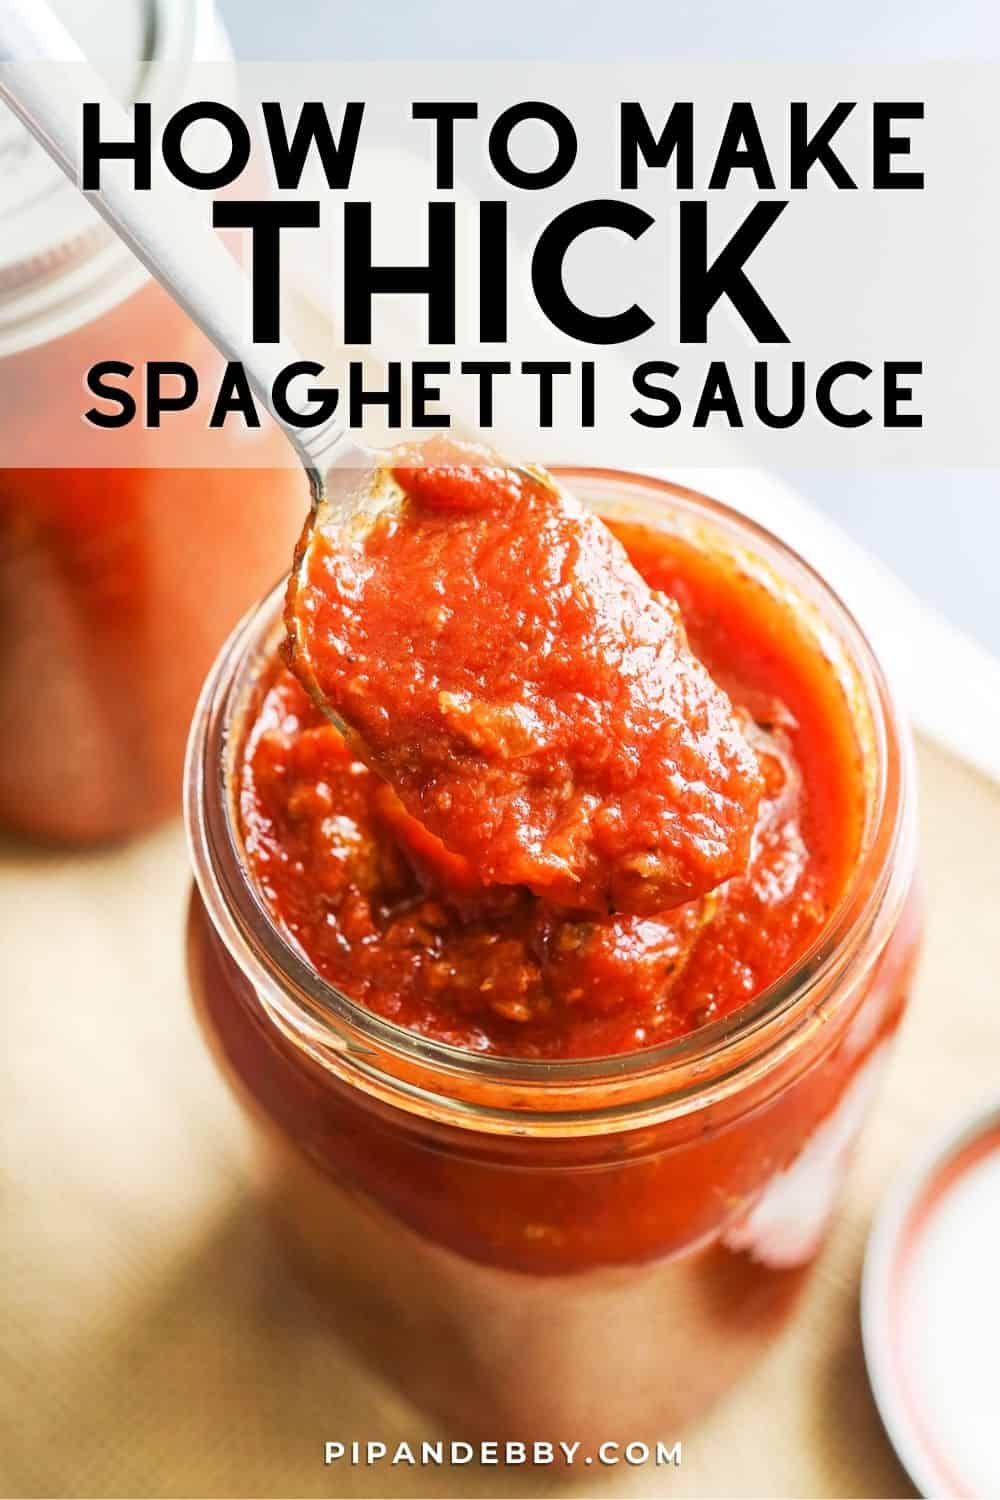 Spaghetti sauce in a jar with a spoon lifting some out. Text overlay reads, "How to make thick spaghetti sauce."